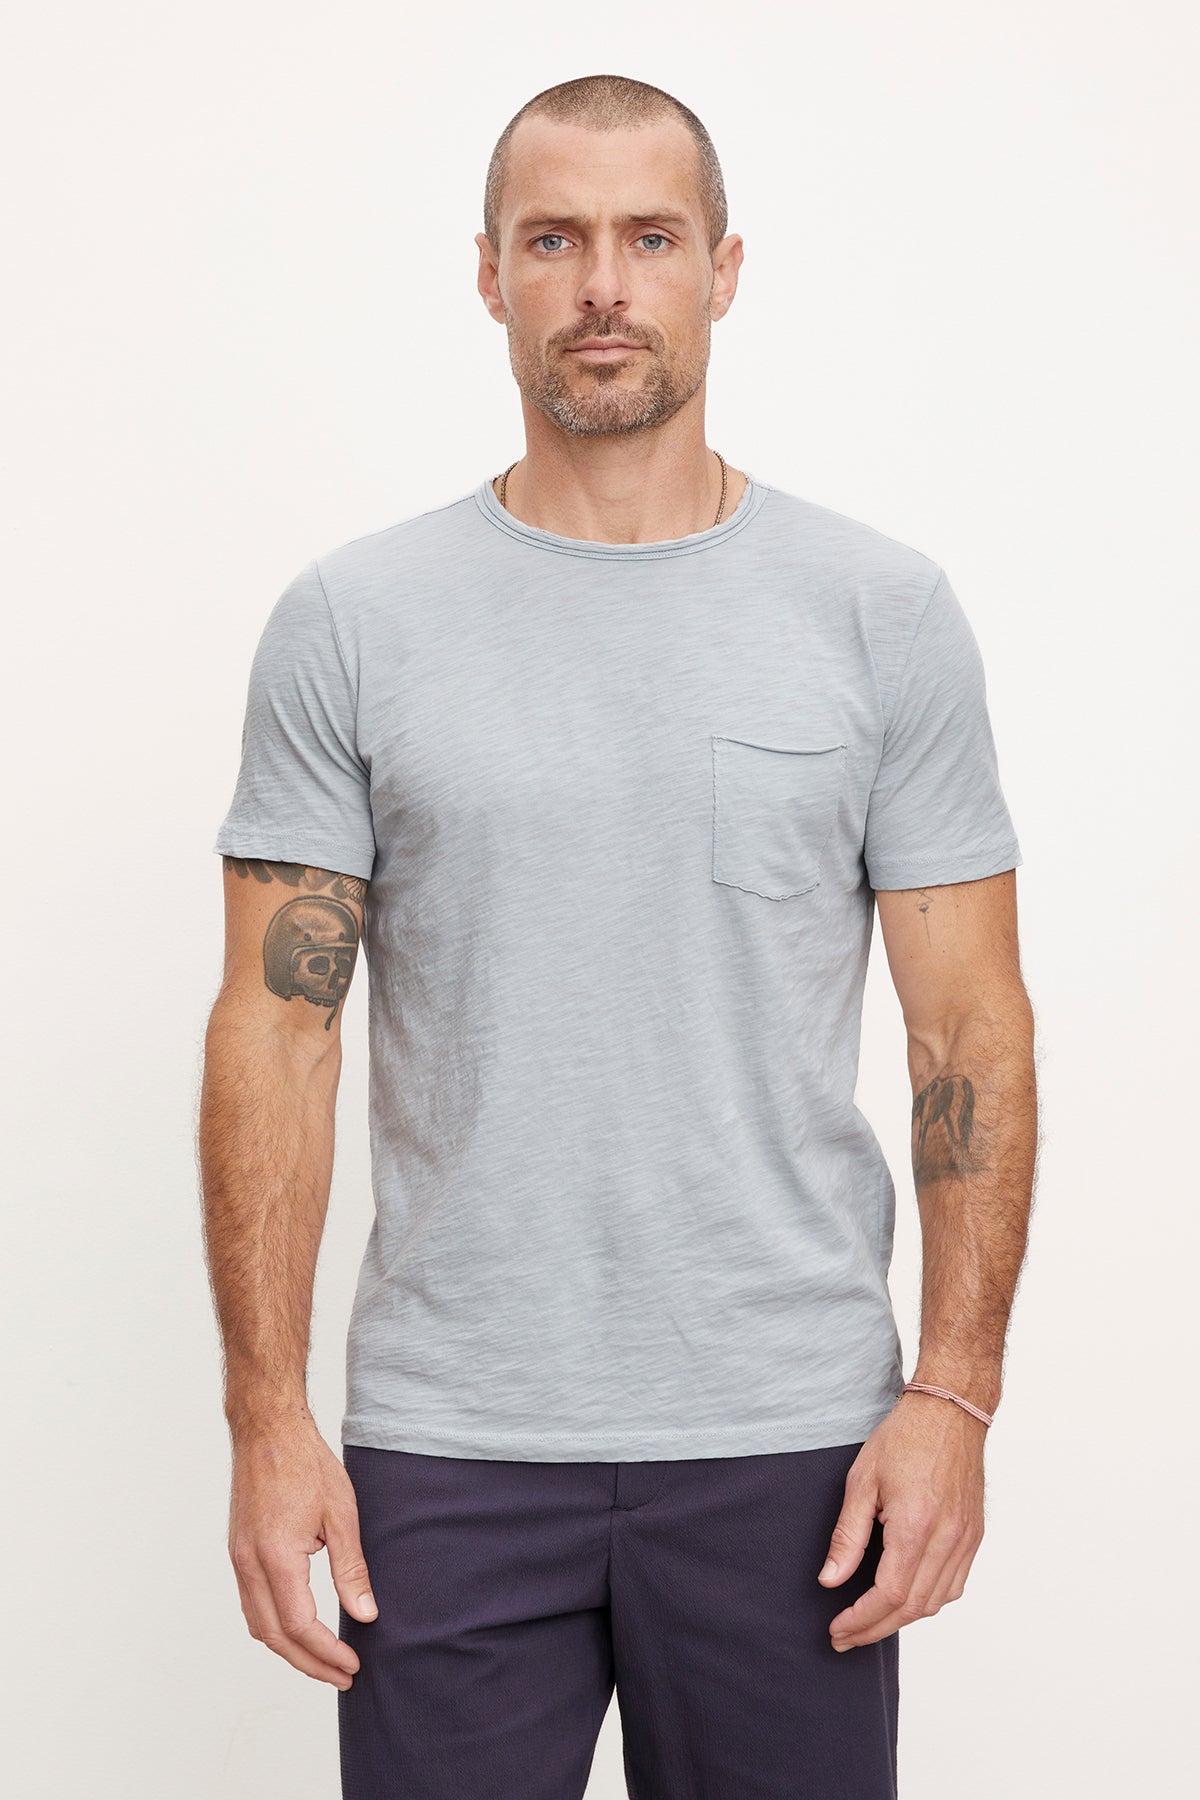 A man with a neutral expression wearing a Velvet by Graham & Spencer CHAD TEE with raw-edge details and dark pants, standing against a plain white background. He has visible tattoos on his arms.-36890799014081